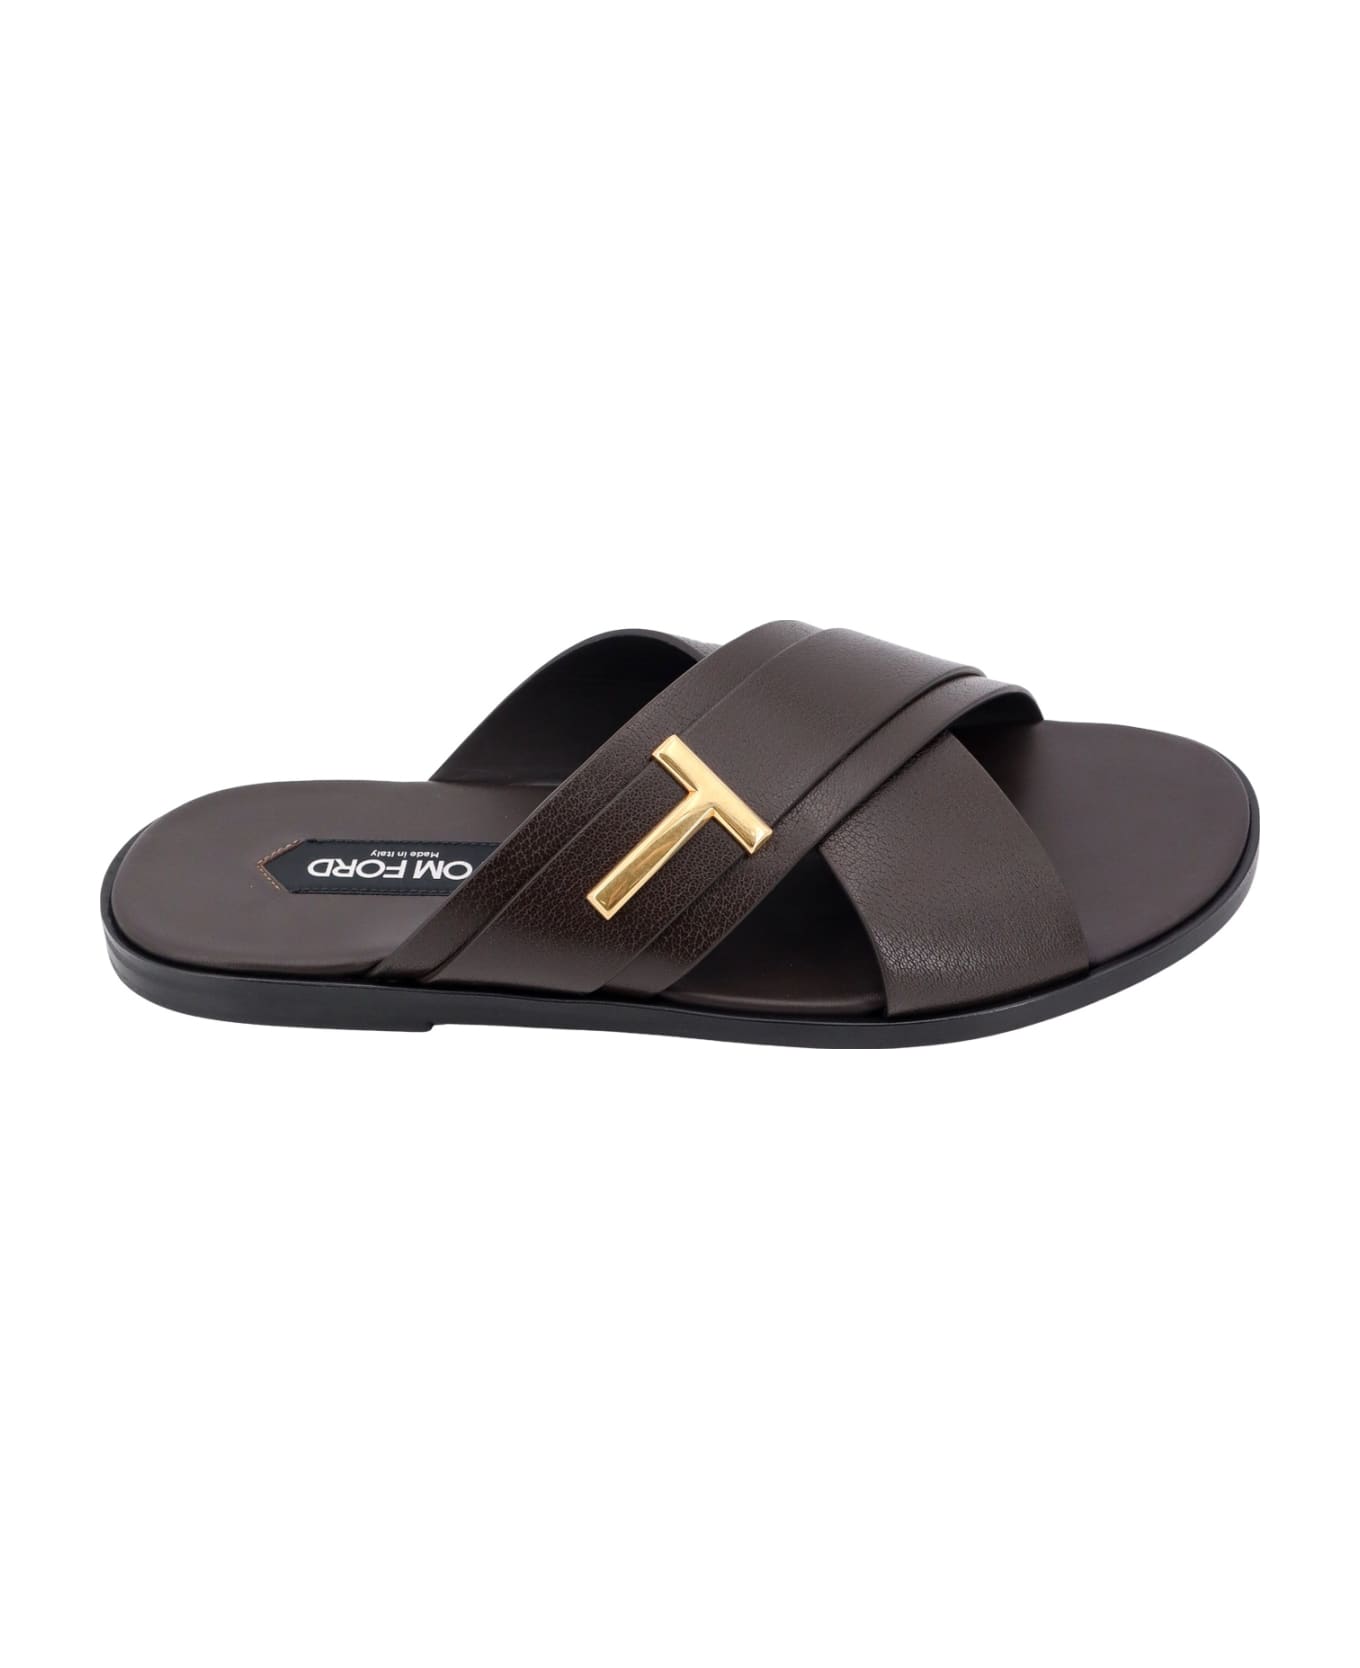 Tom Ford Sandals - Brown その他各種シューズ